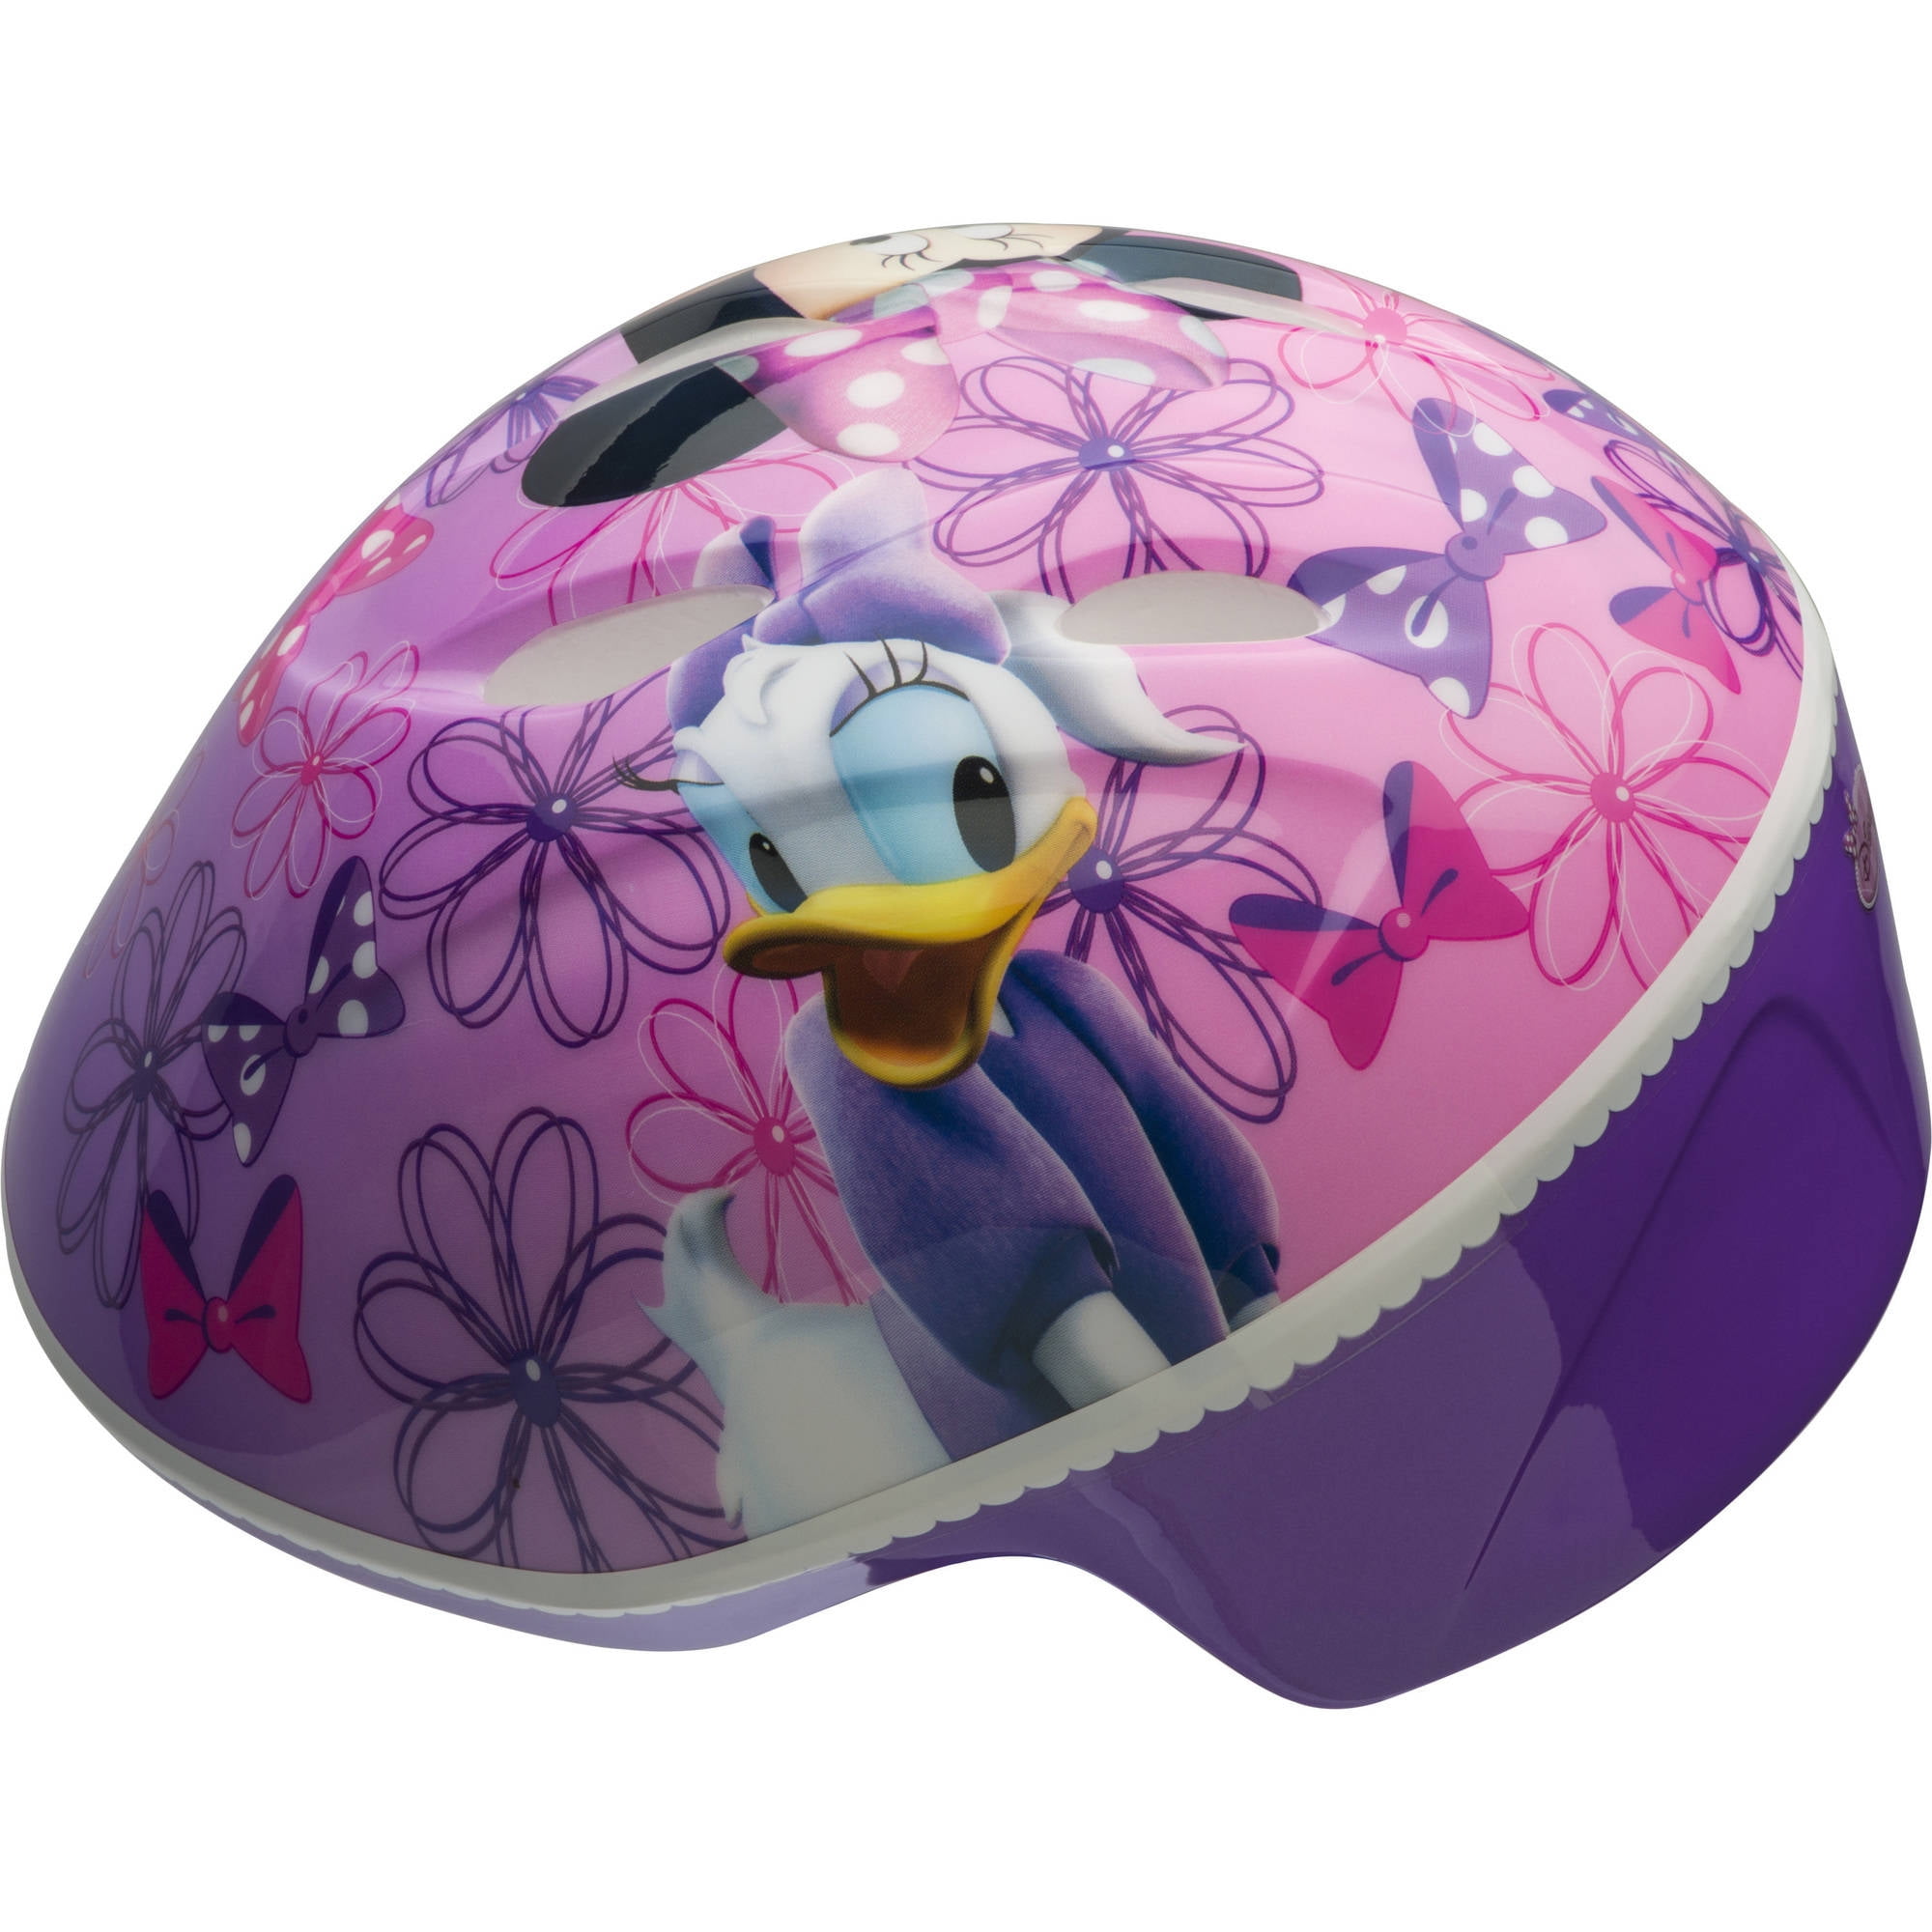 Bell Disney Minnie Mouse Bike Helmets for Child and Toddler 